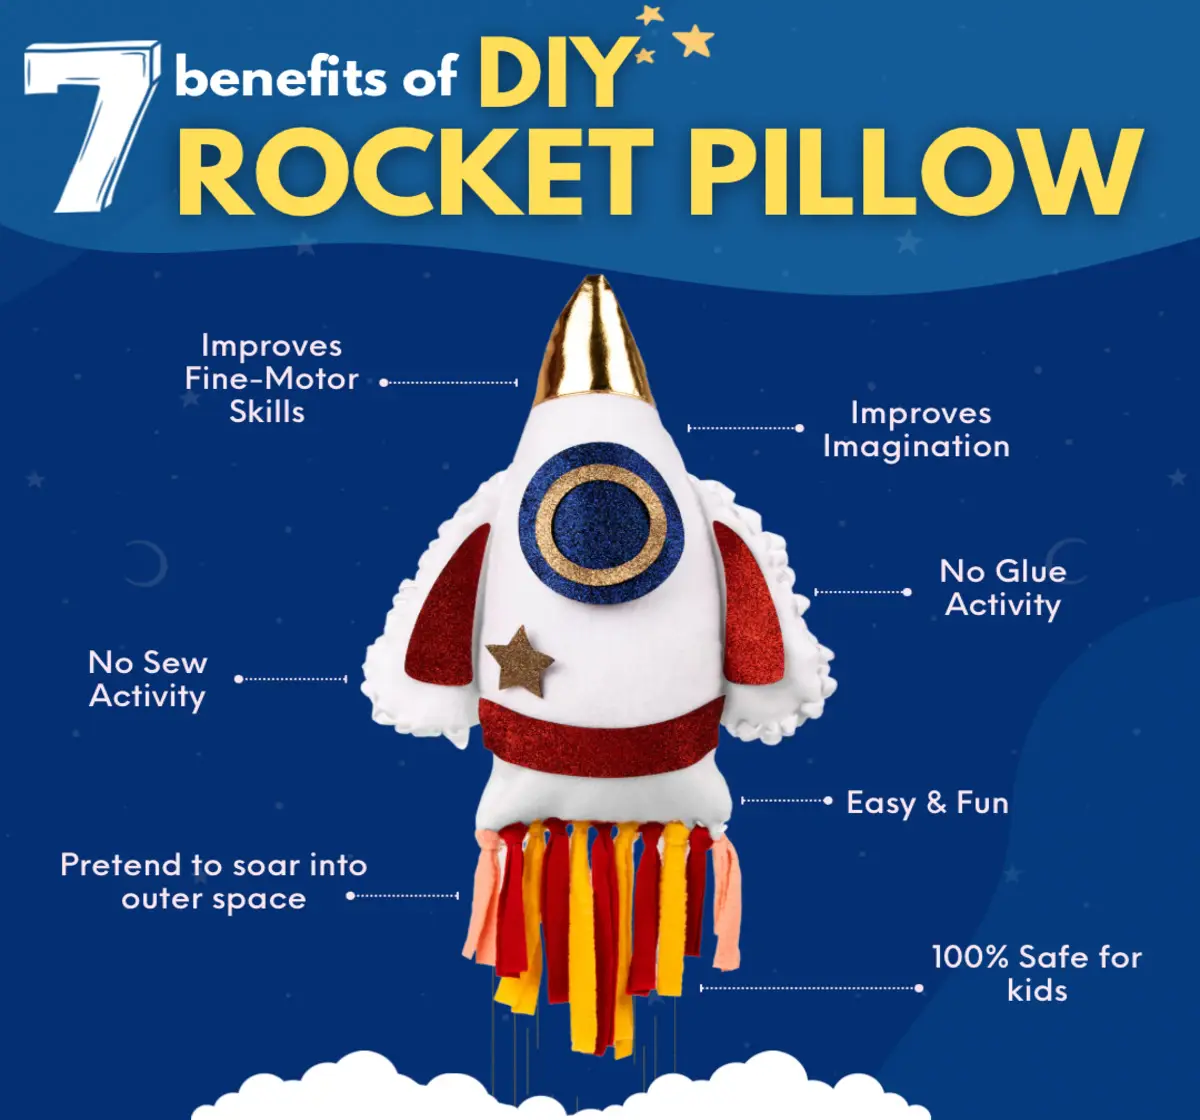 PepPlay Make Your Rocket Pillow DIY Crafts Kit For Kids of Age 6Y+, Multicolour